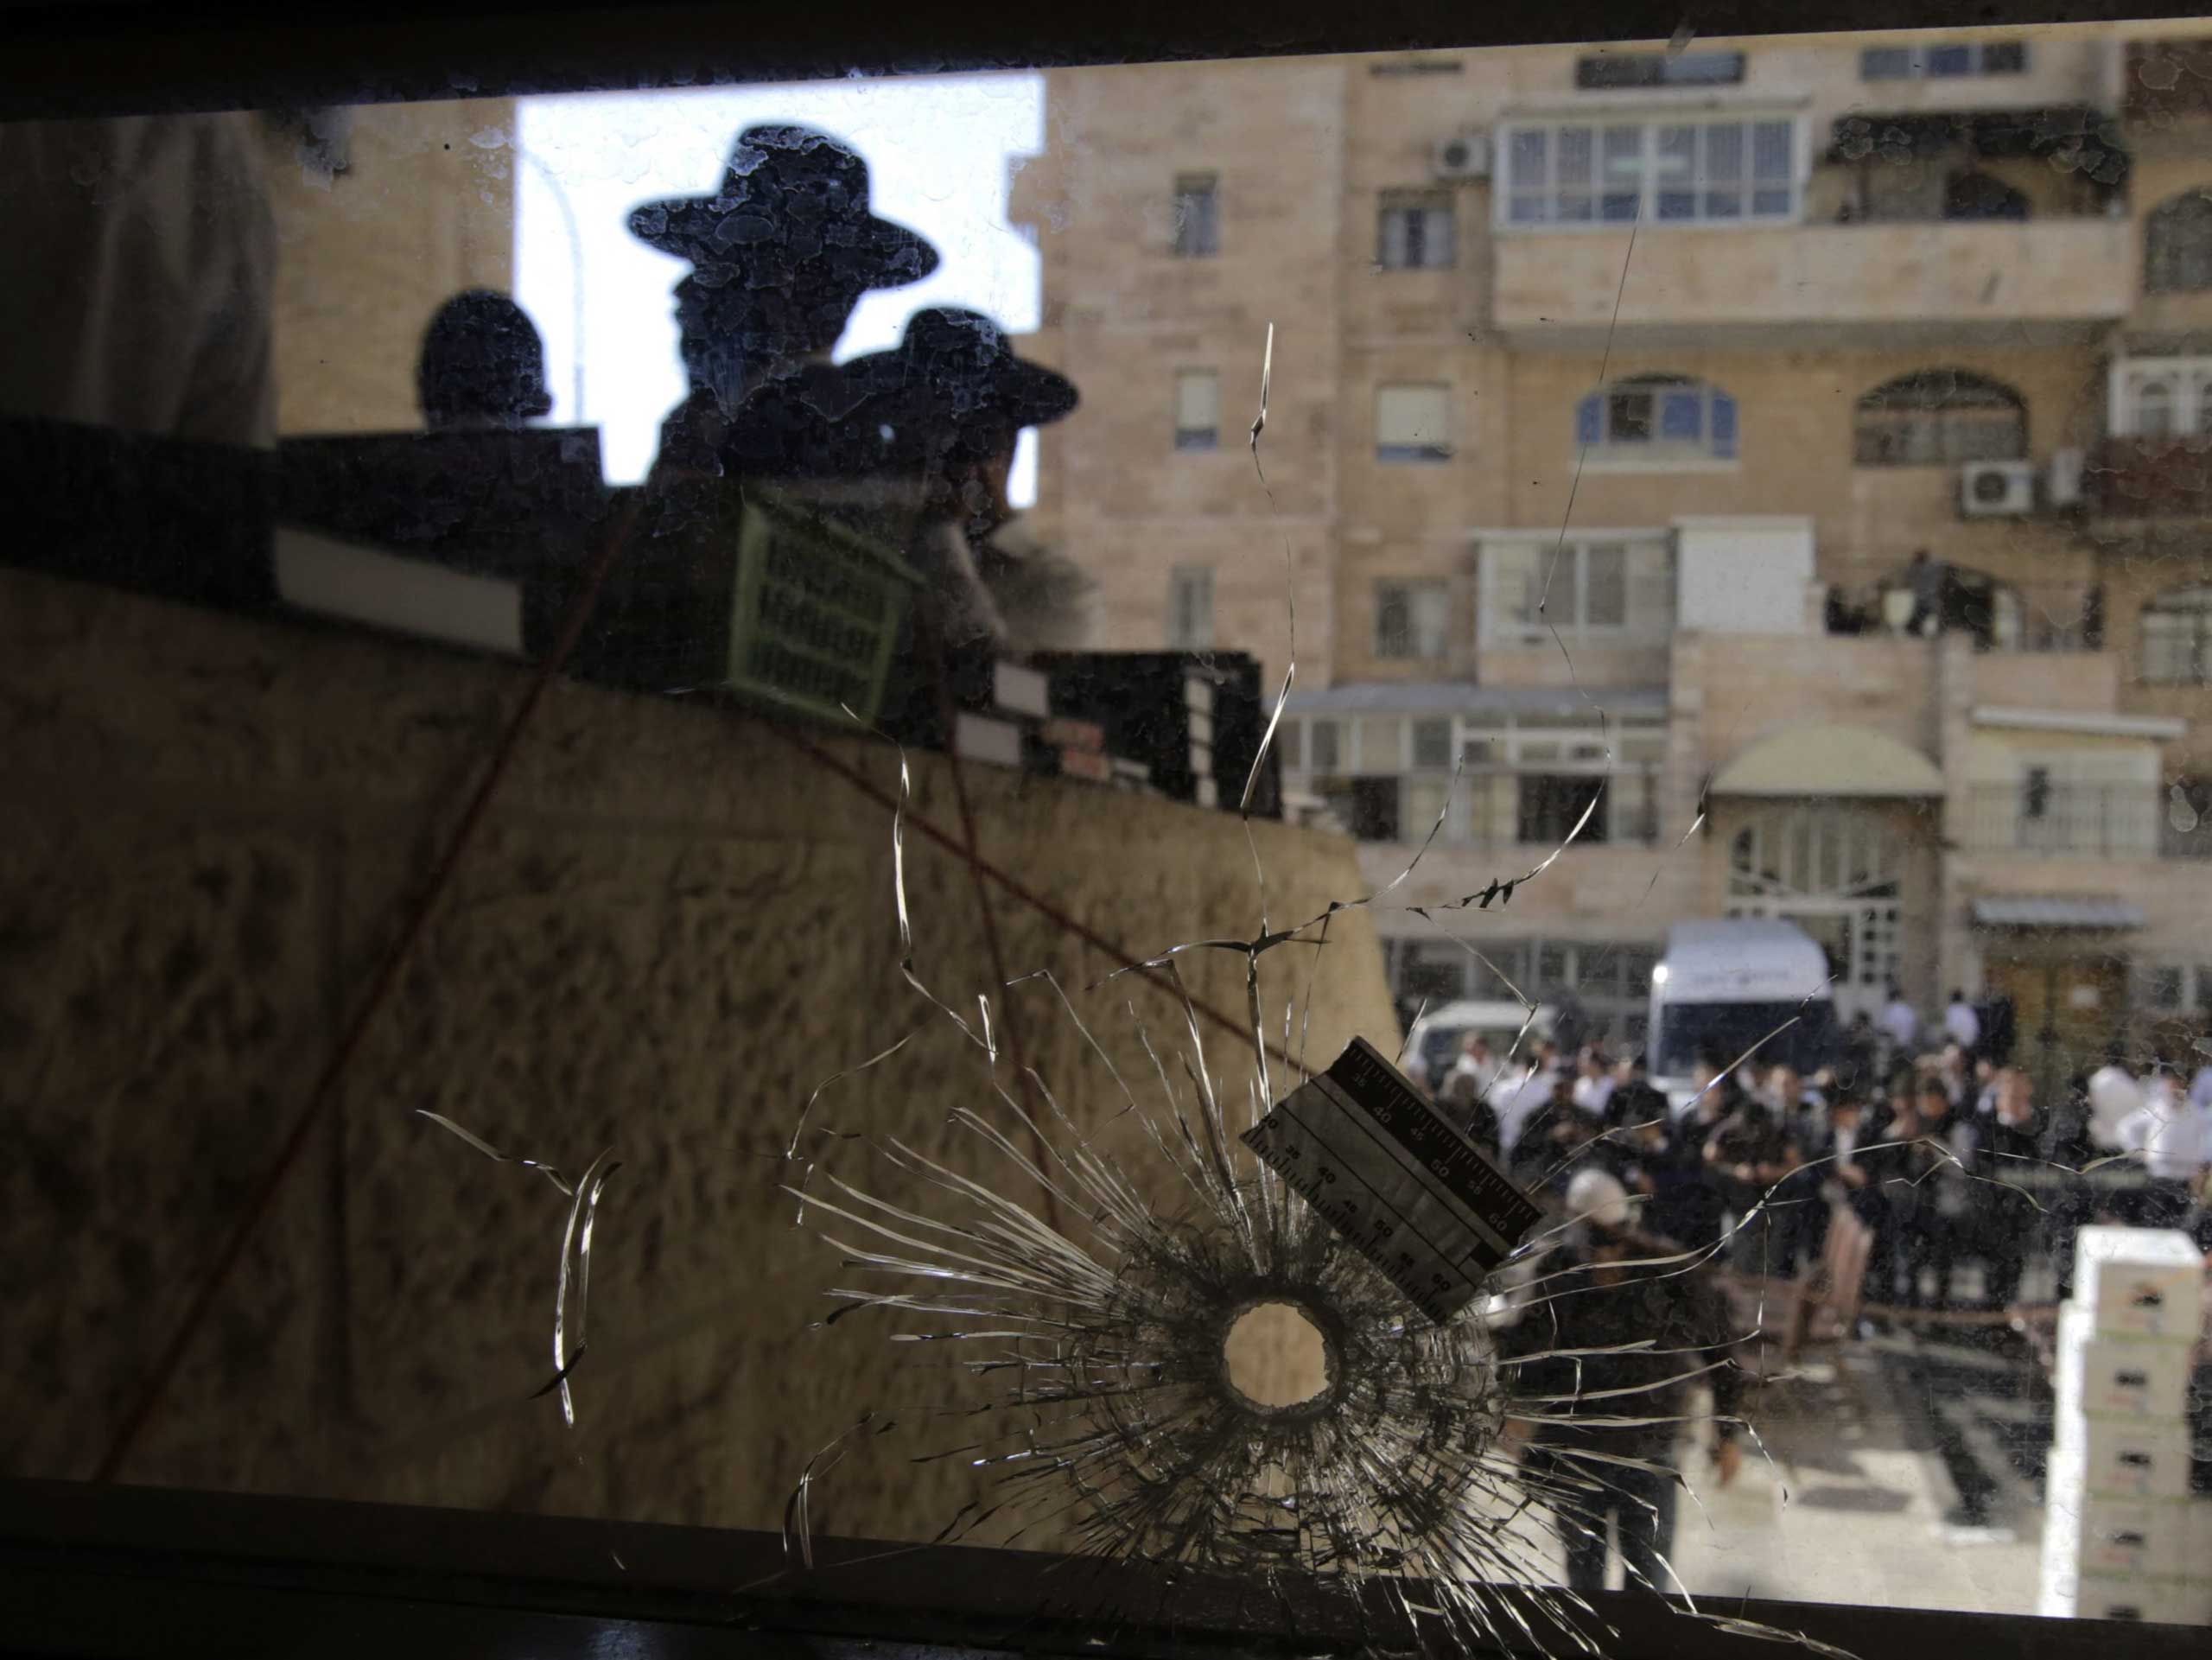 A bullet hole through the front window of a synagogue in the Har Nof neighborhood of Jerusalem on Nov. 18, 2014.